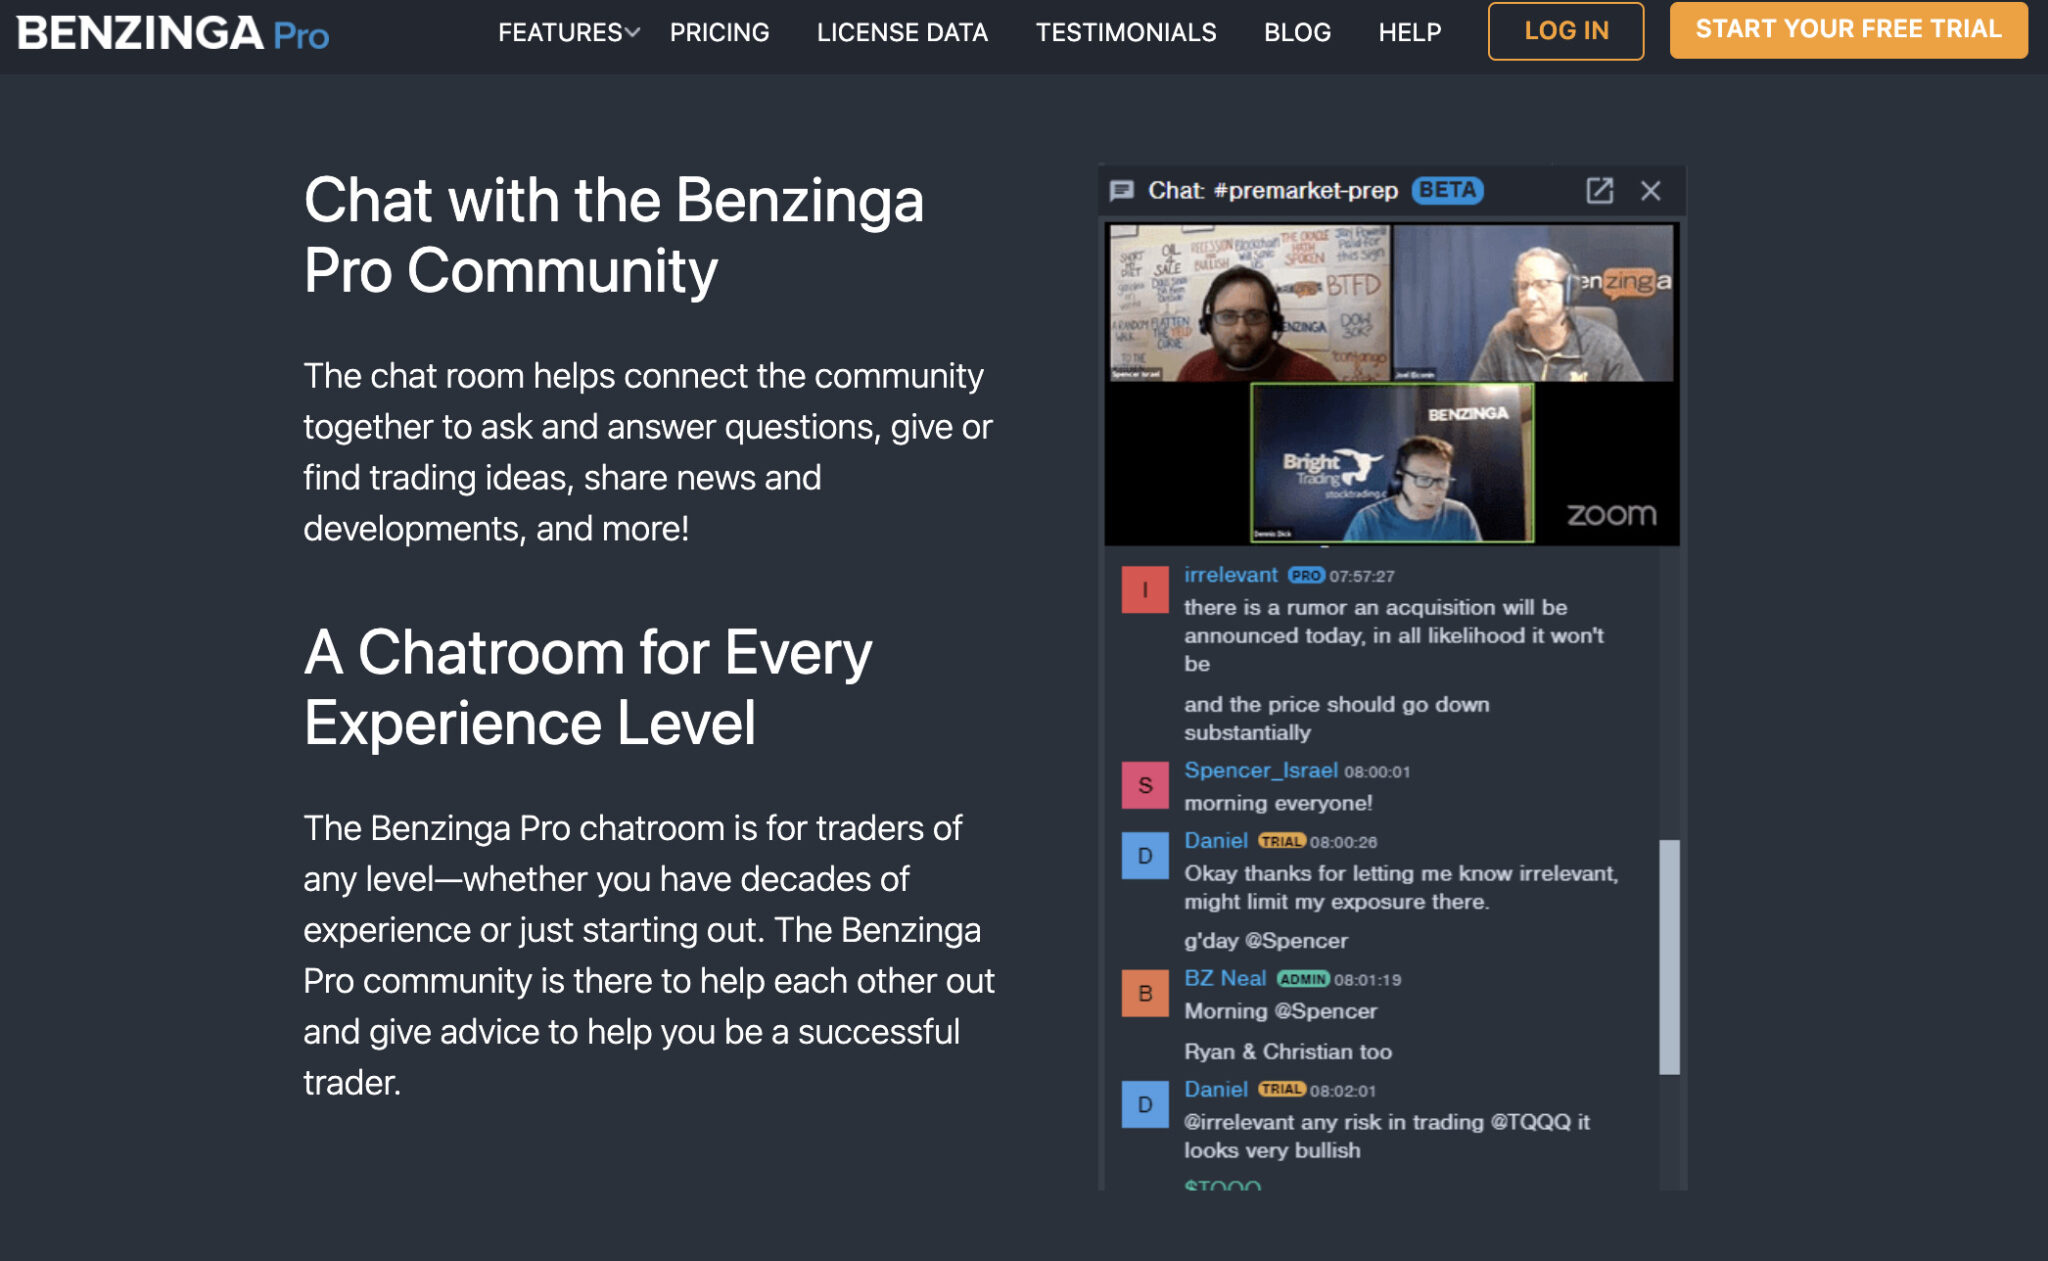 Chat Room and Community